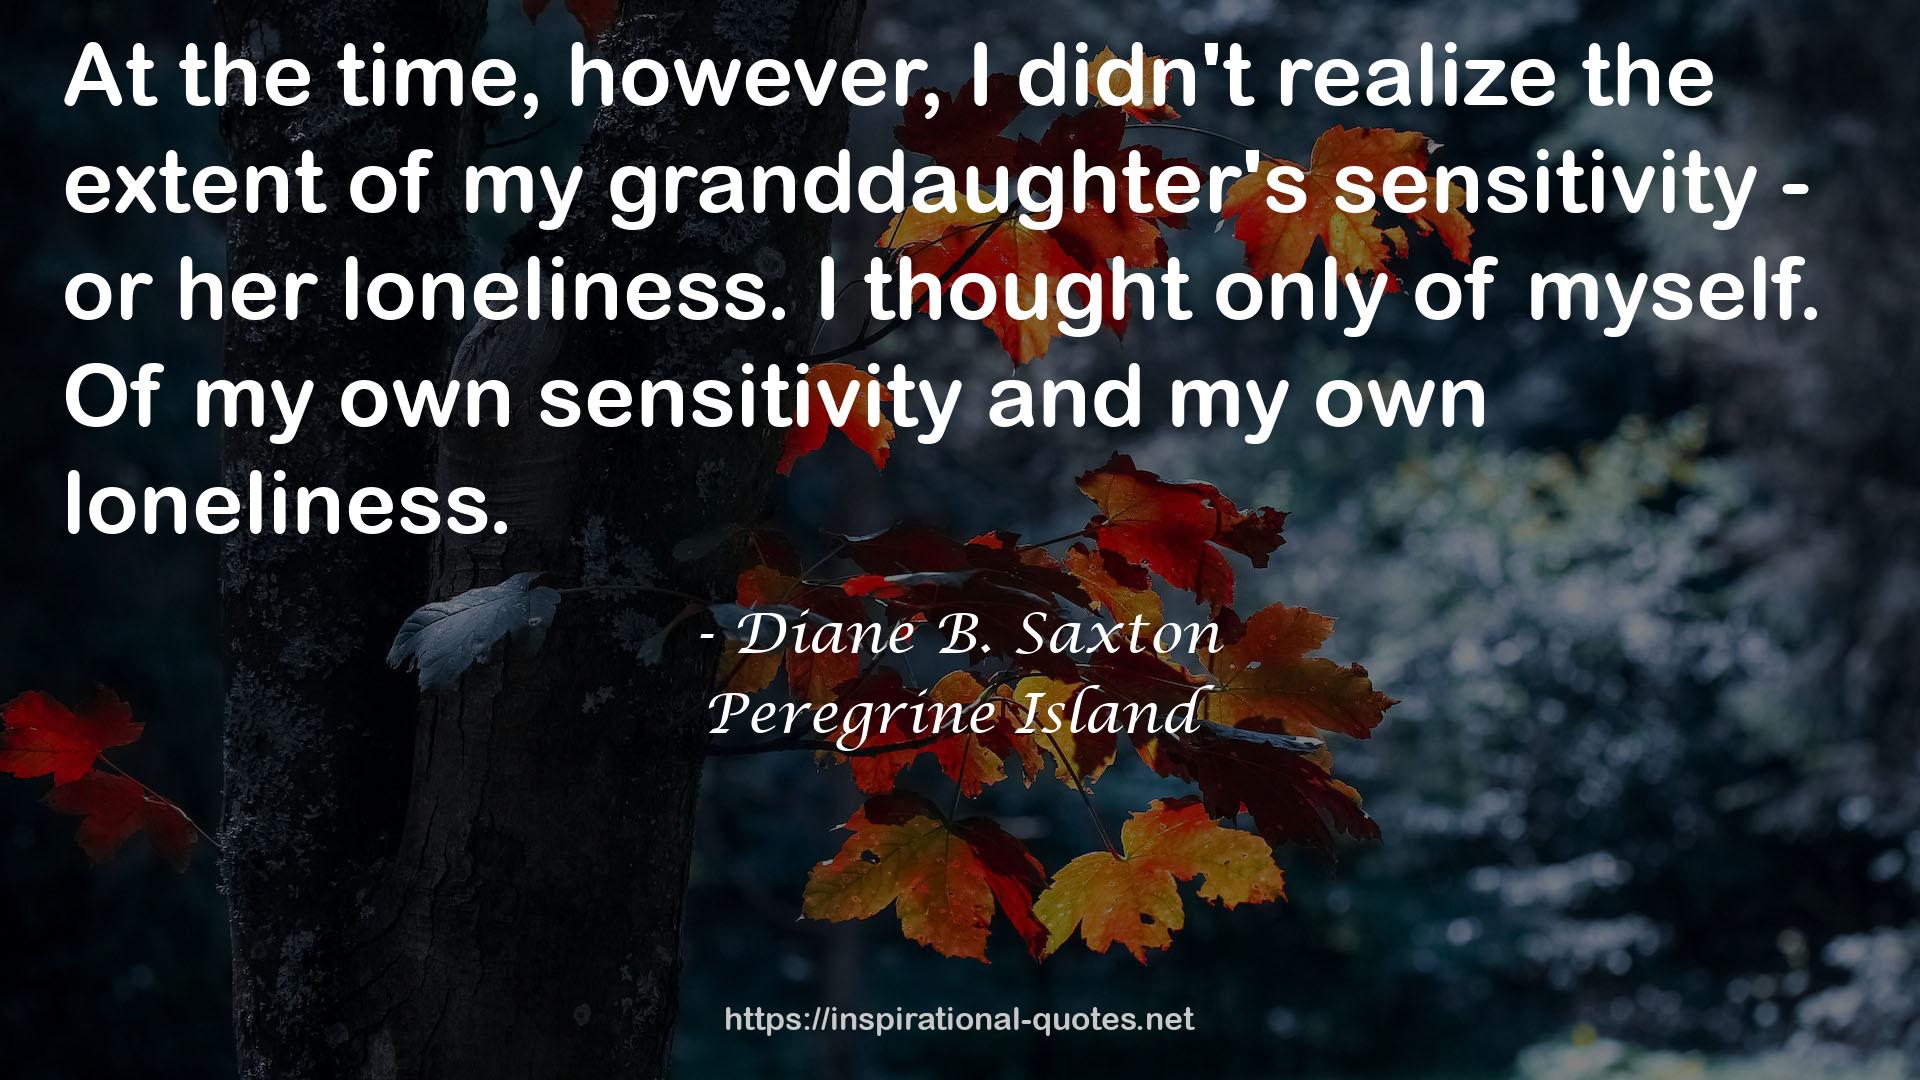 my granddaughter's sensitivity  QUOTES